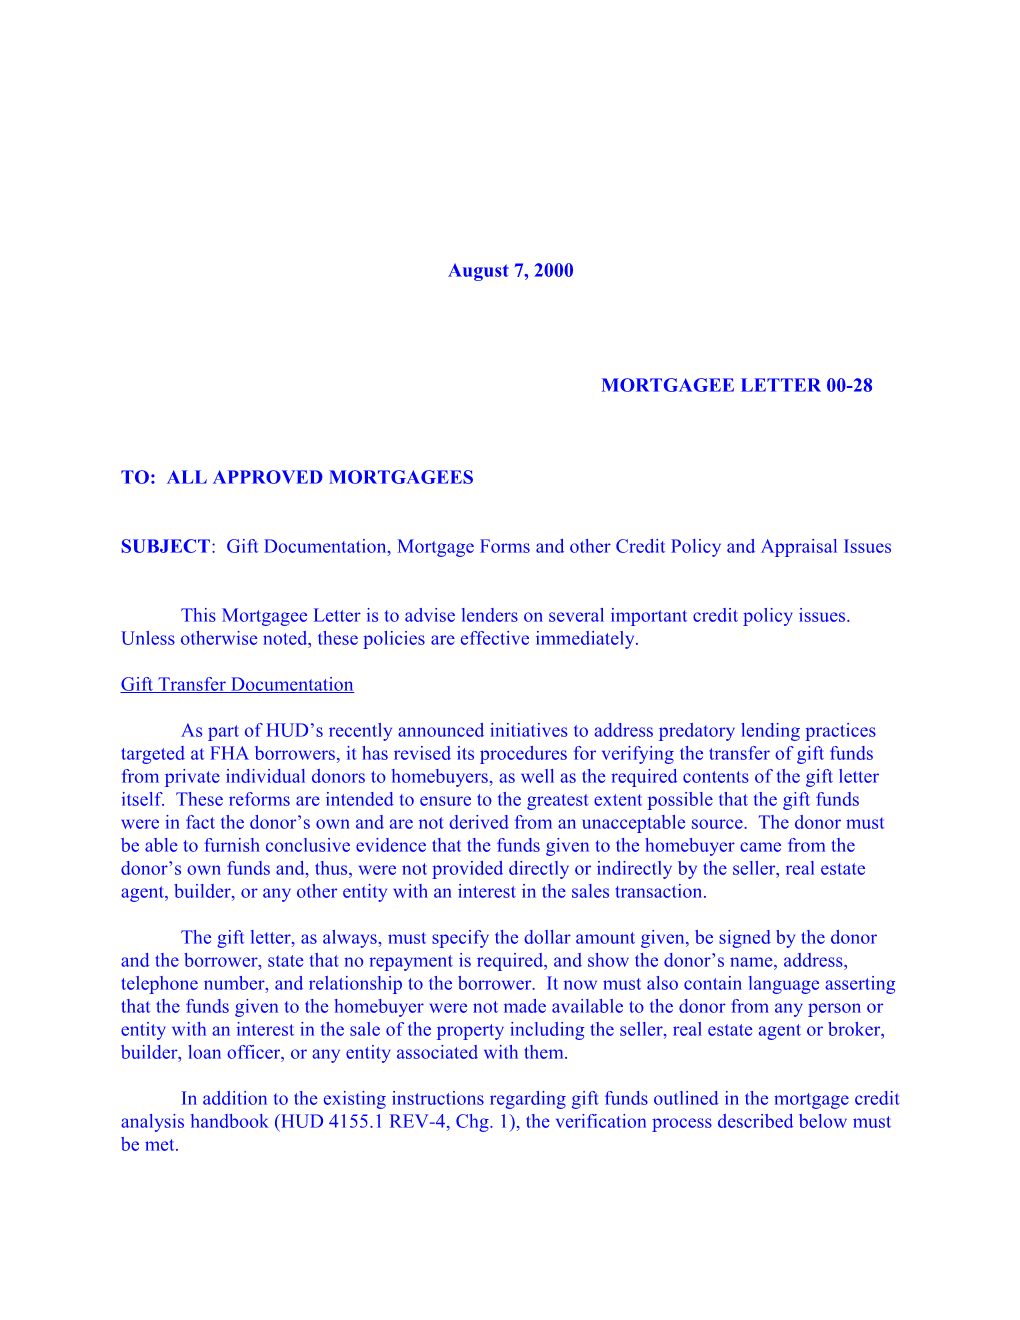 Mortgagee Letter 00-28